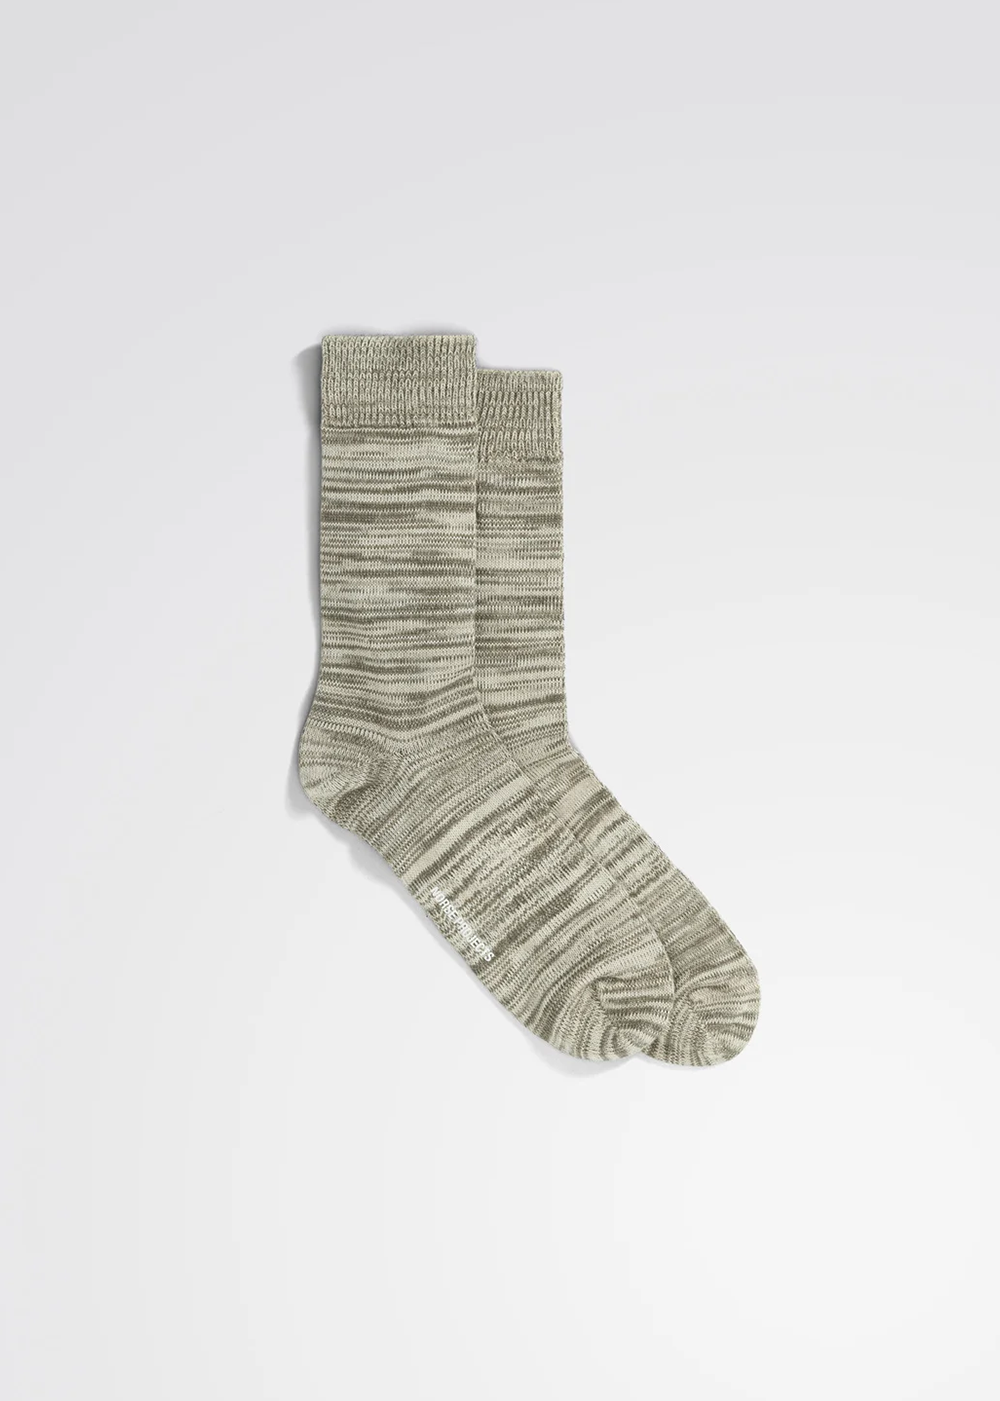 Zoomed out view of the Bjarki Cotton Twist Sock in Sediment Green by Norse Projects.